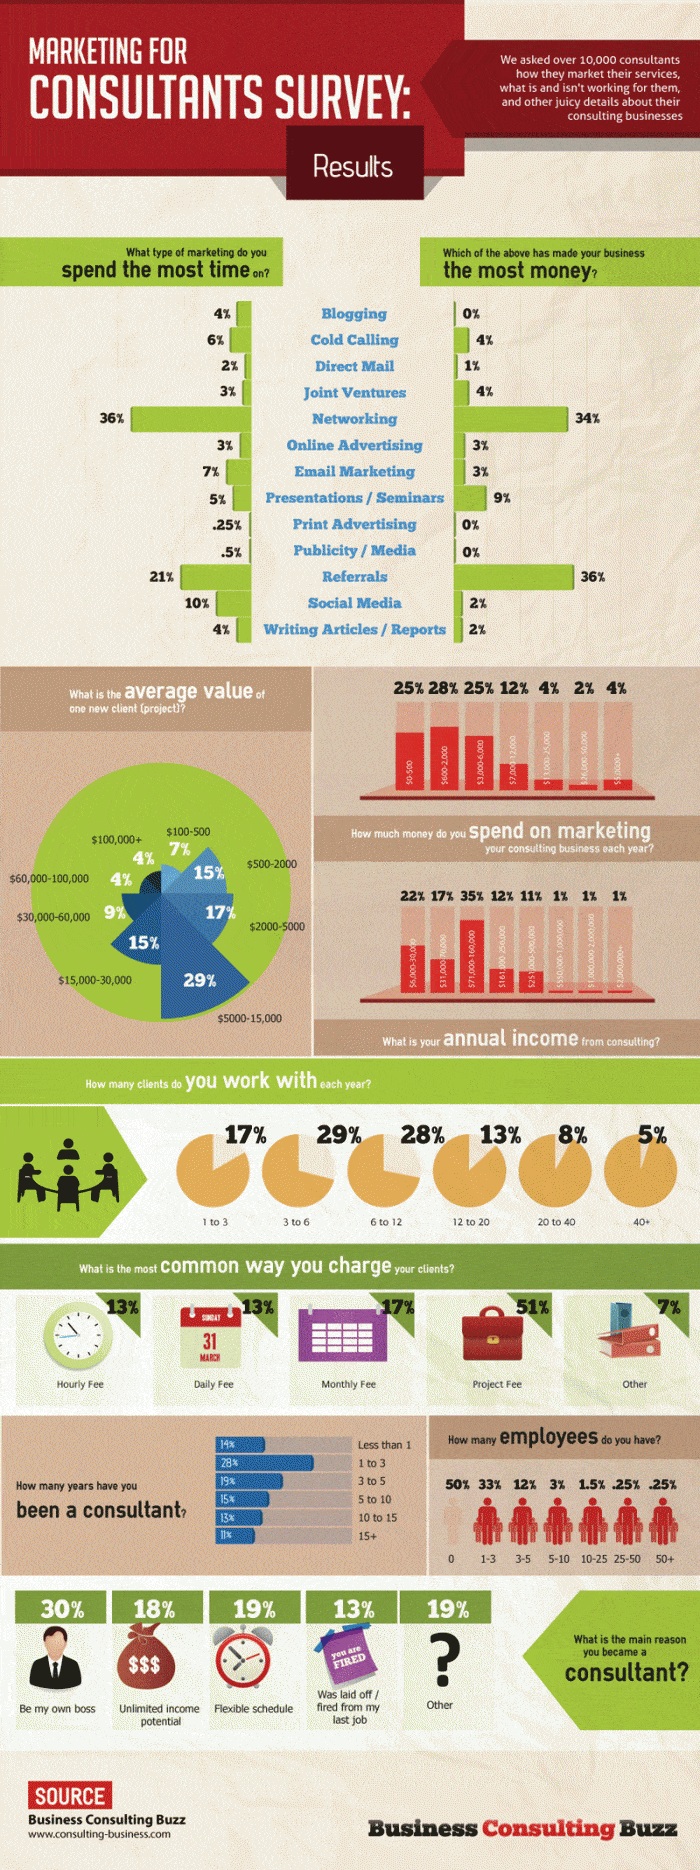 Marketing for Consultants Survey Results Infographic